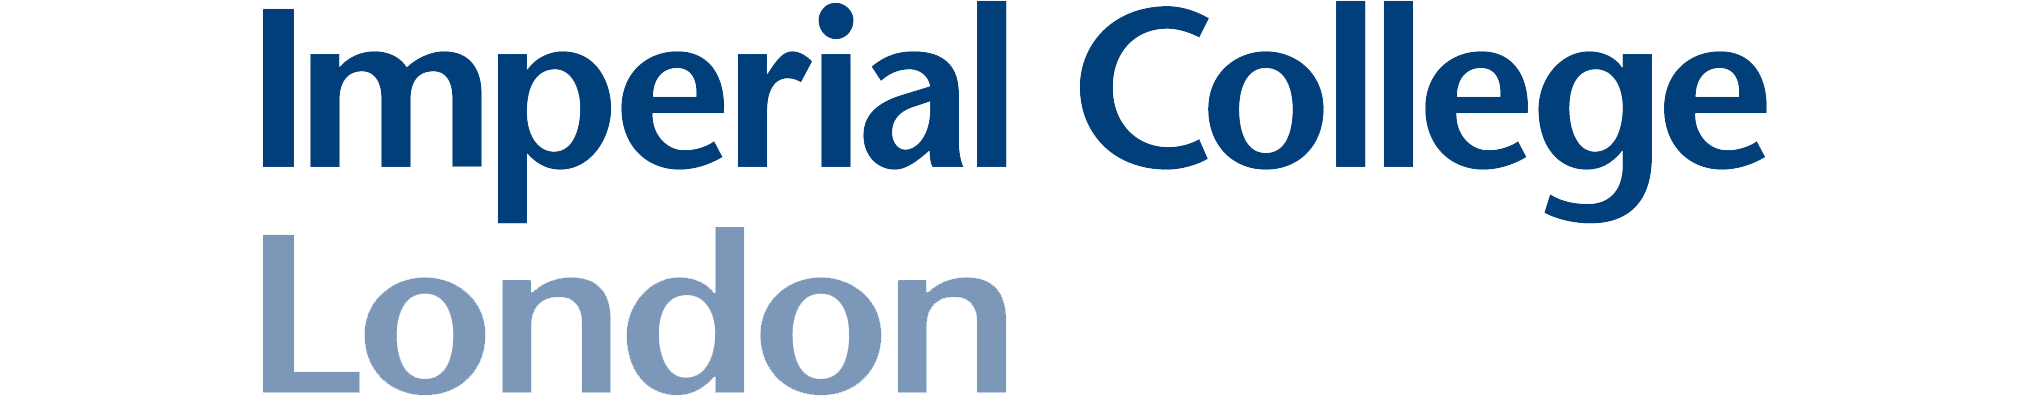 logo_imperial_college_london copy.png